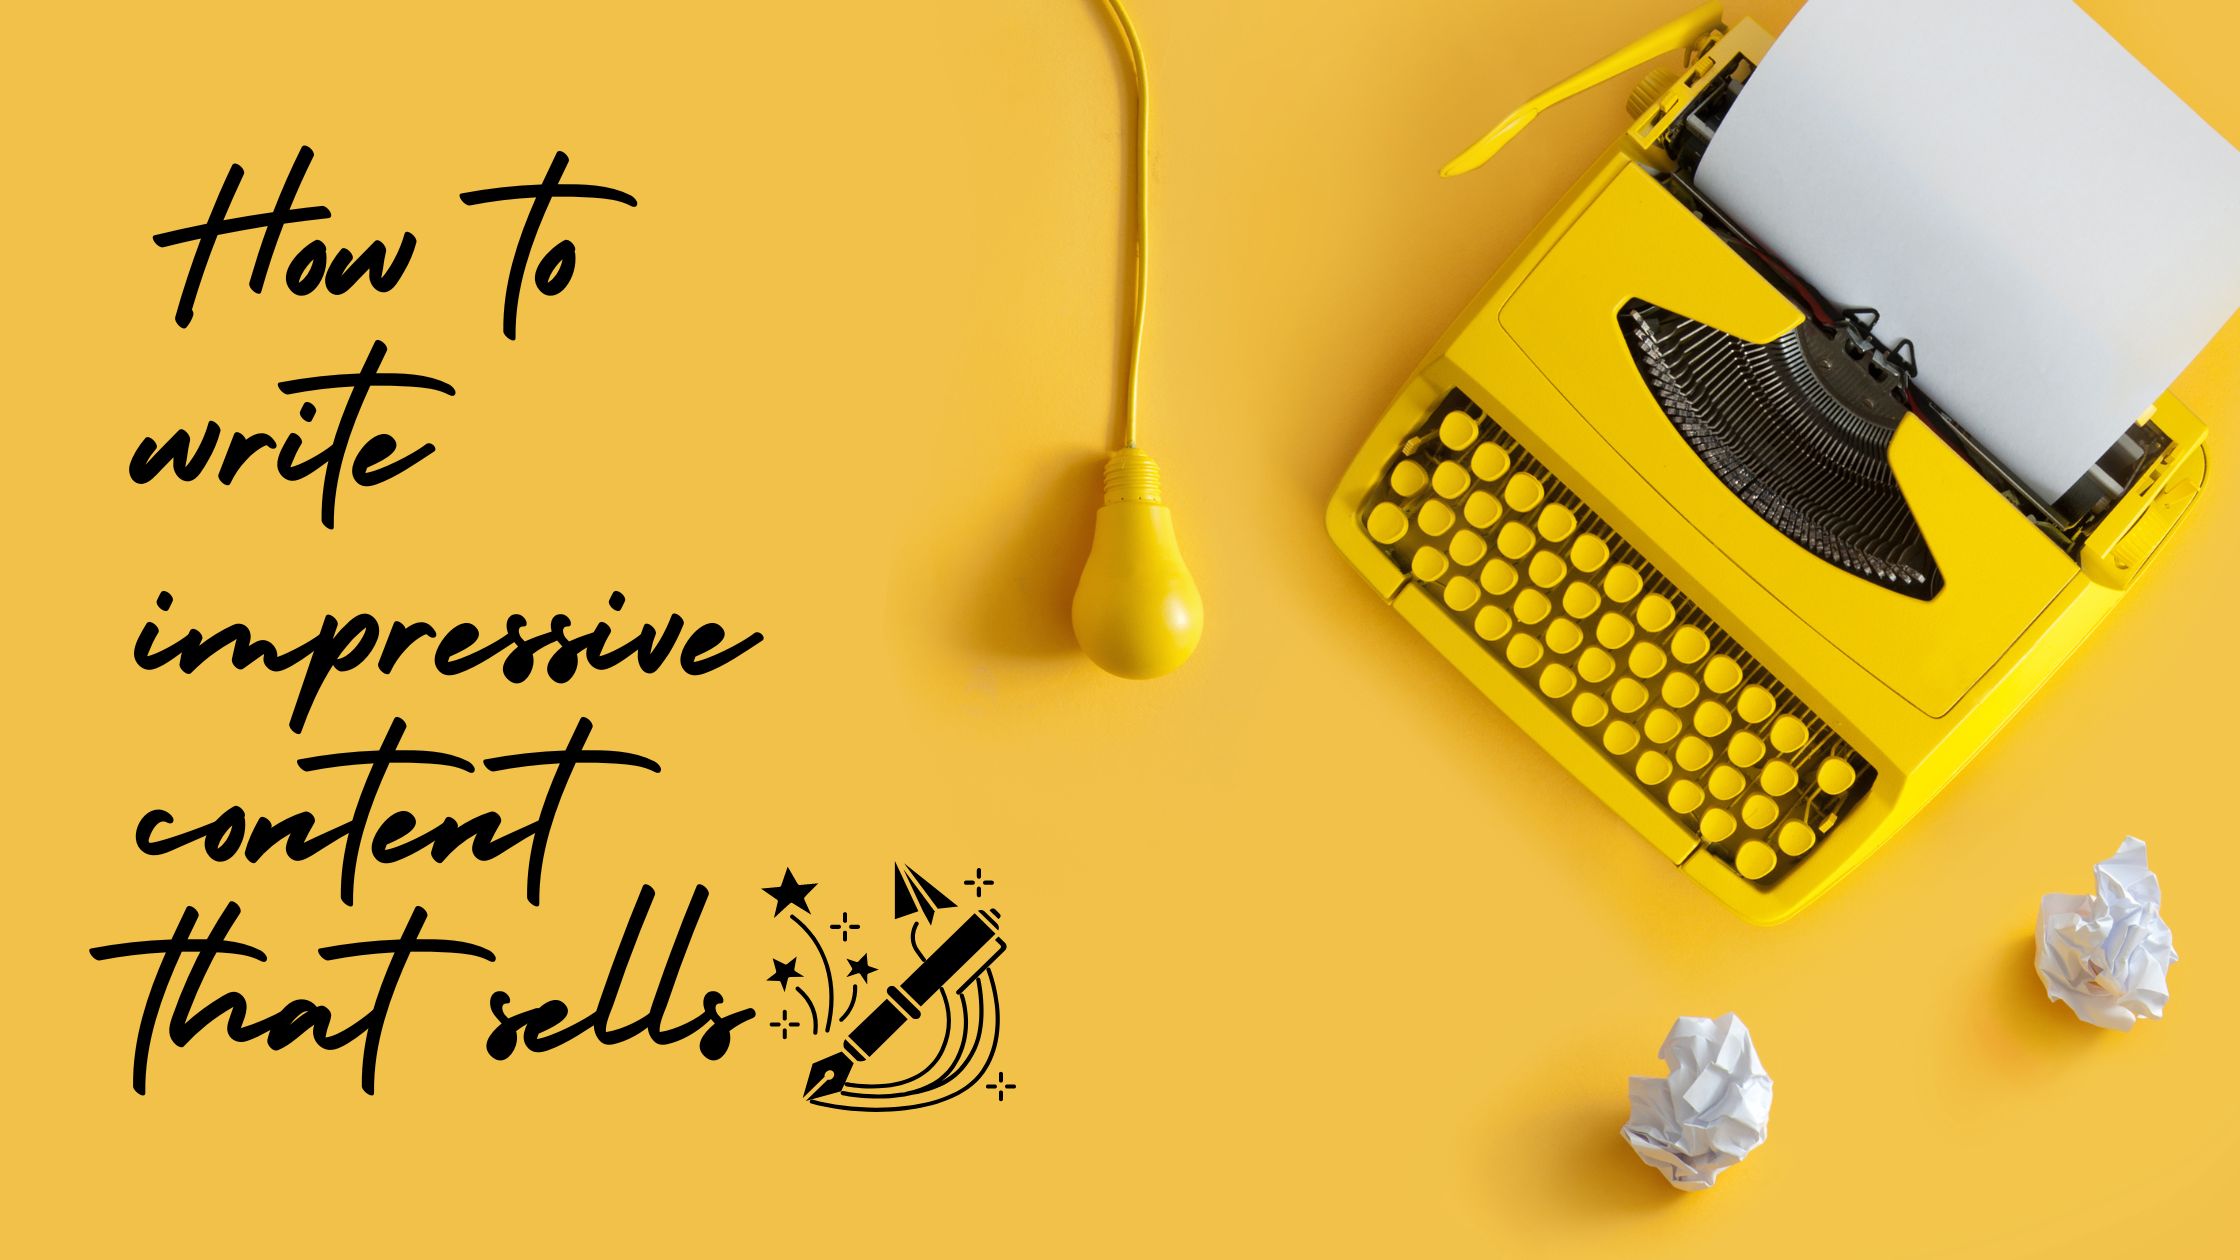 How to write impressive content that sells